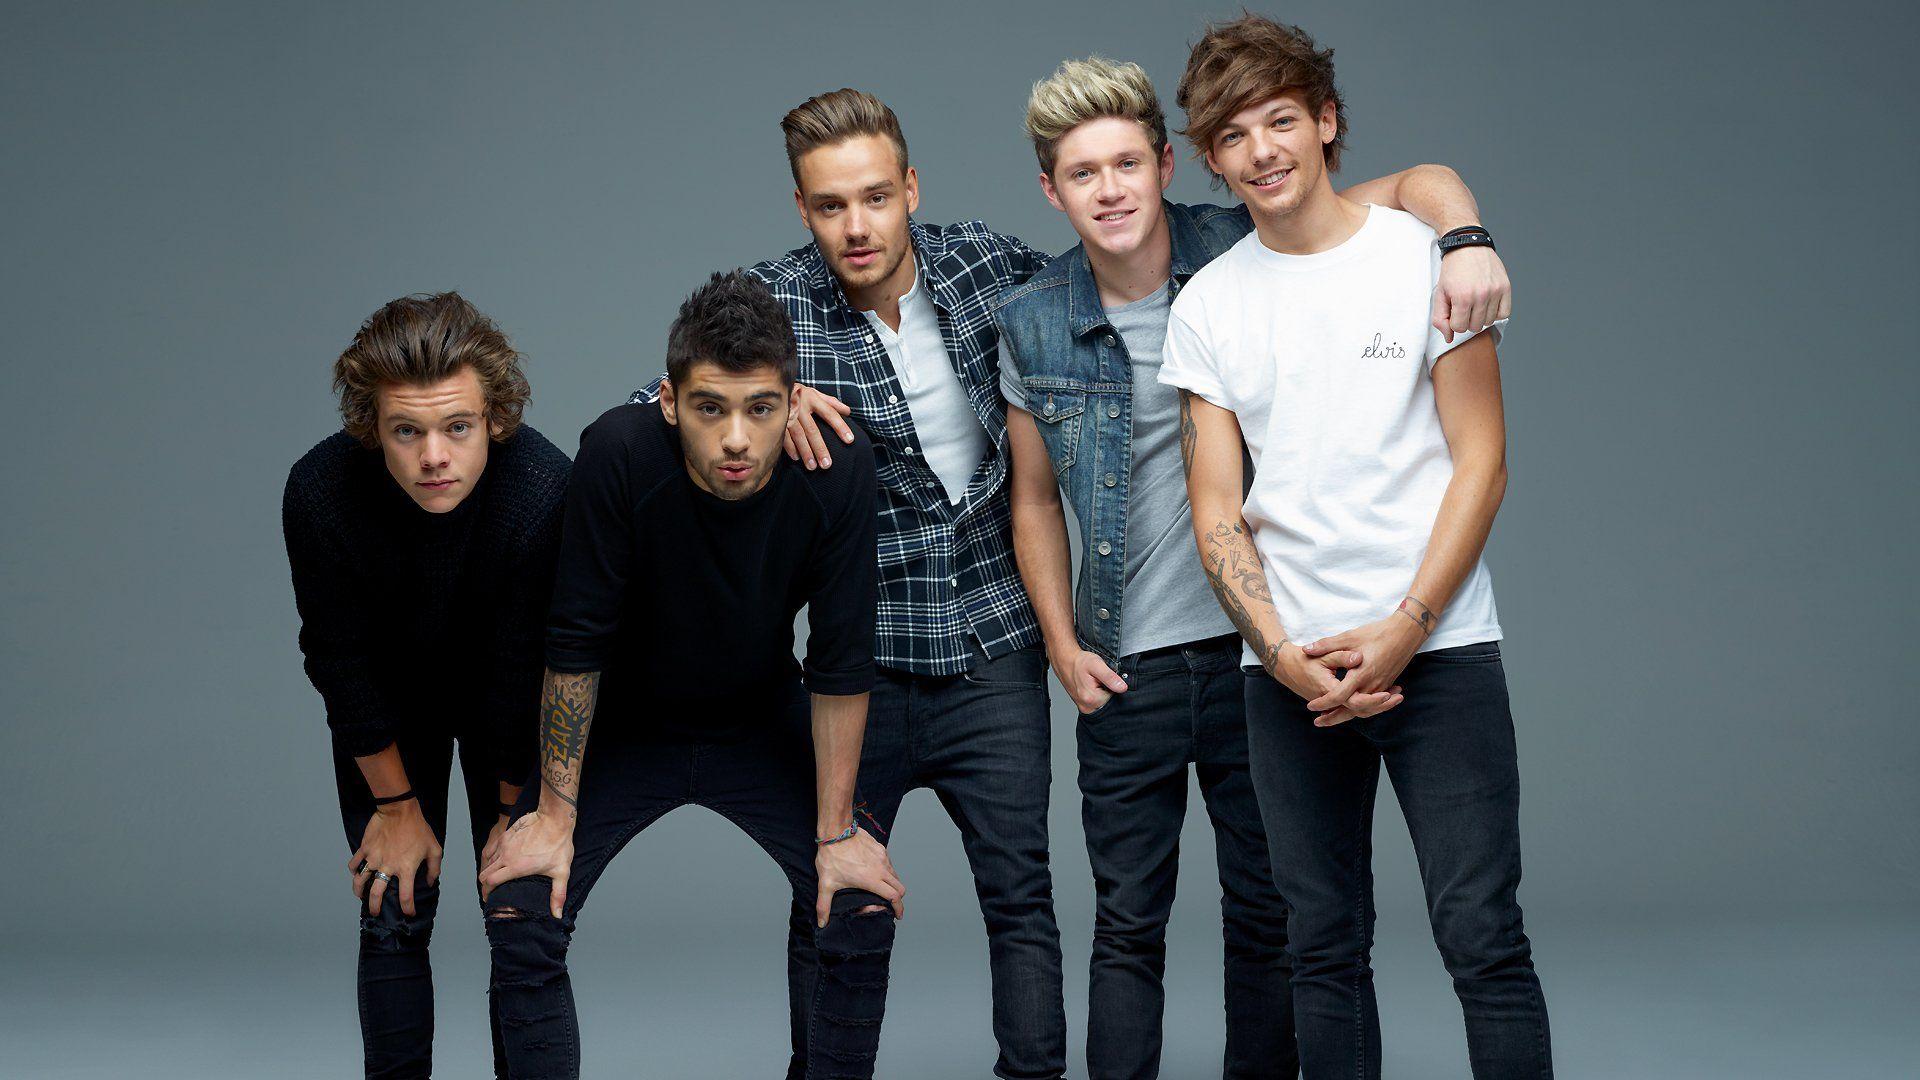 One Direction HD Wallpaper